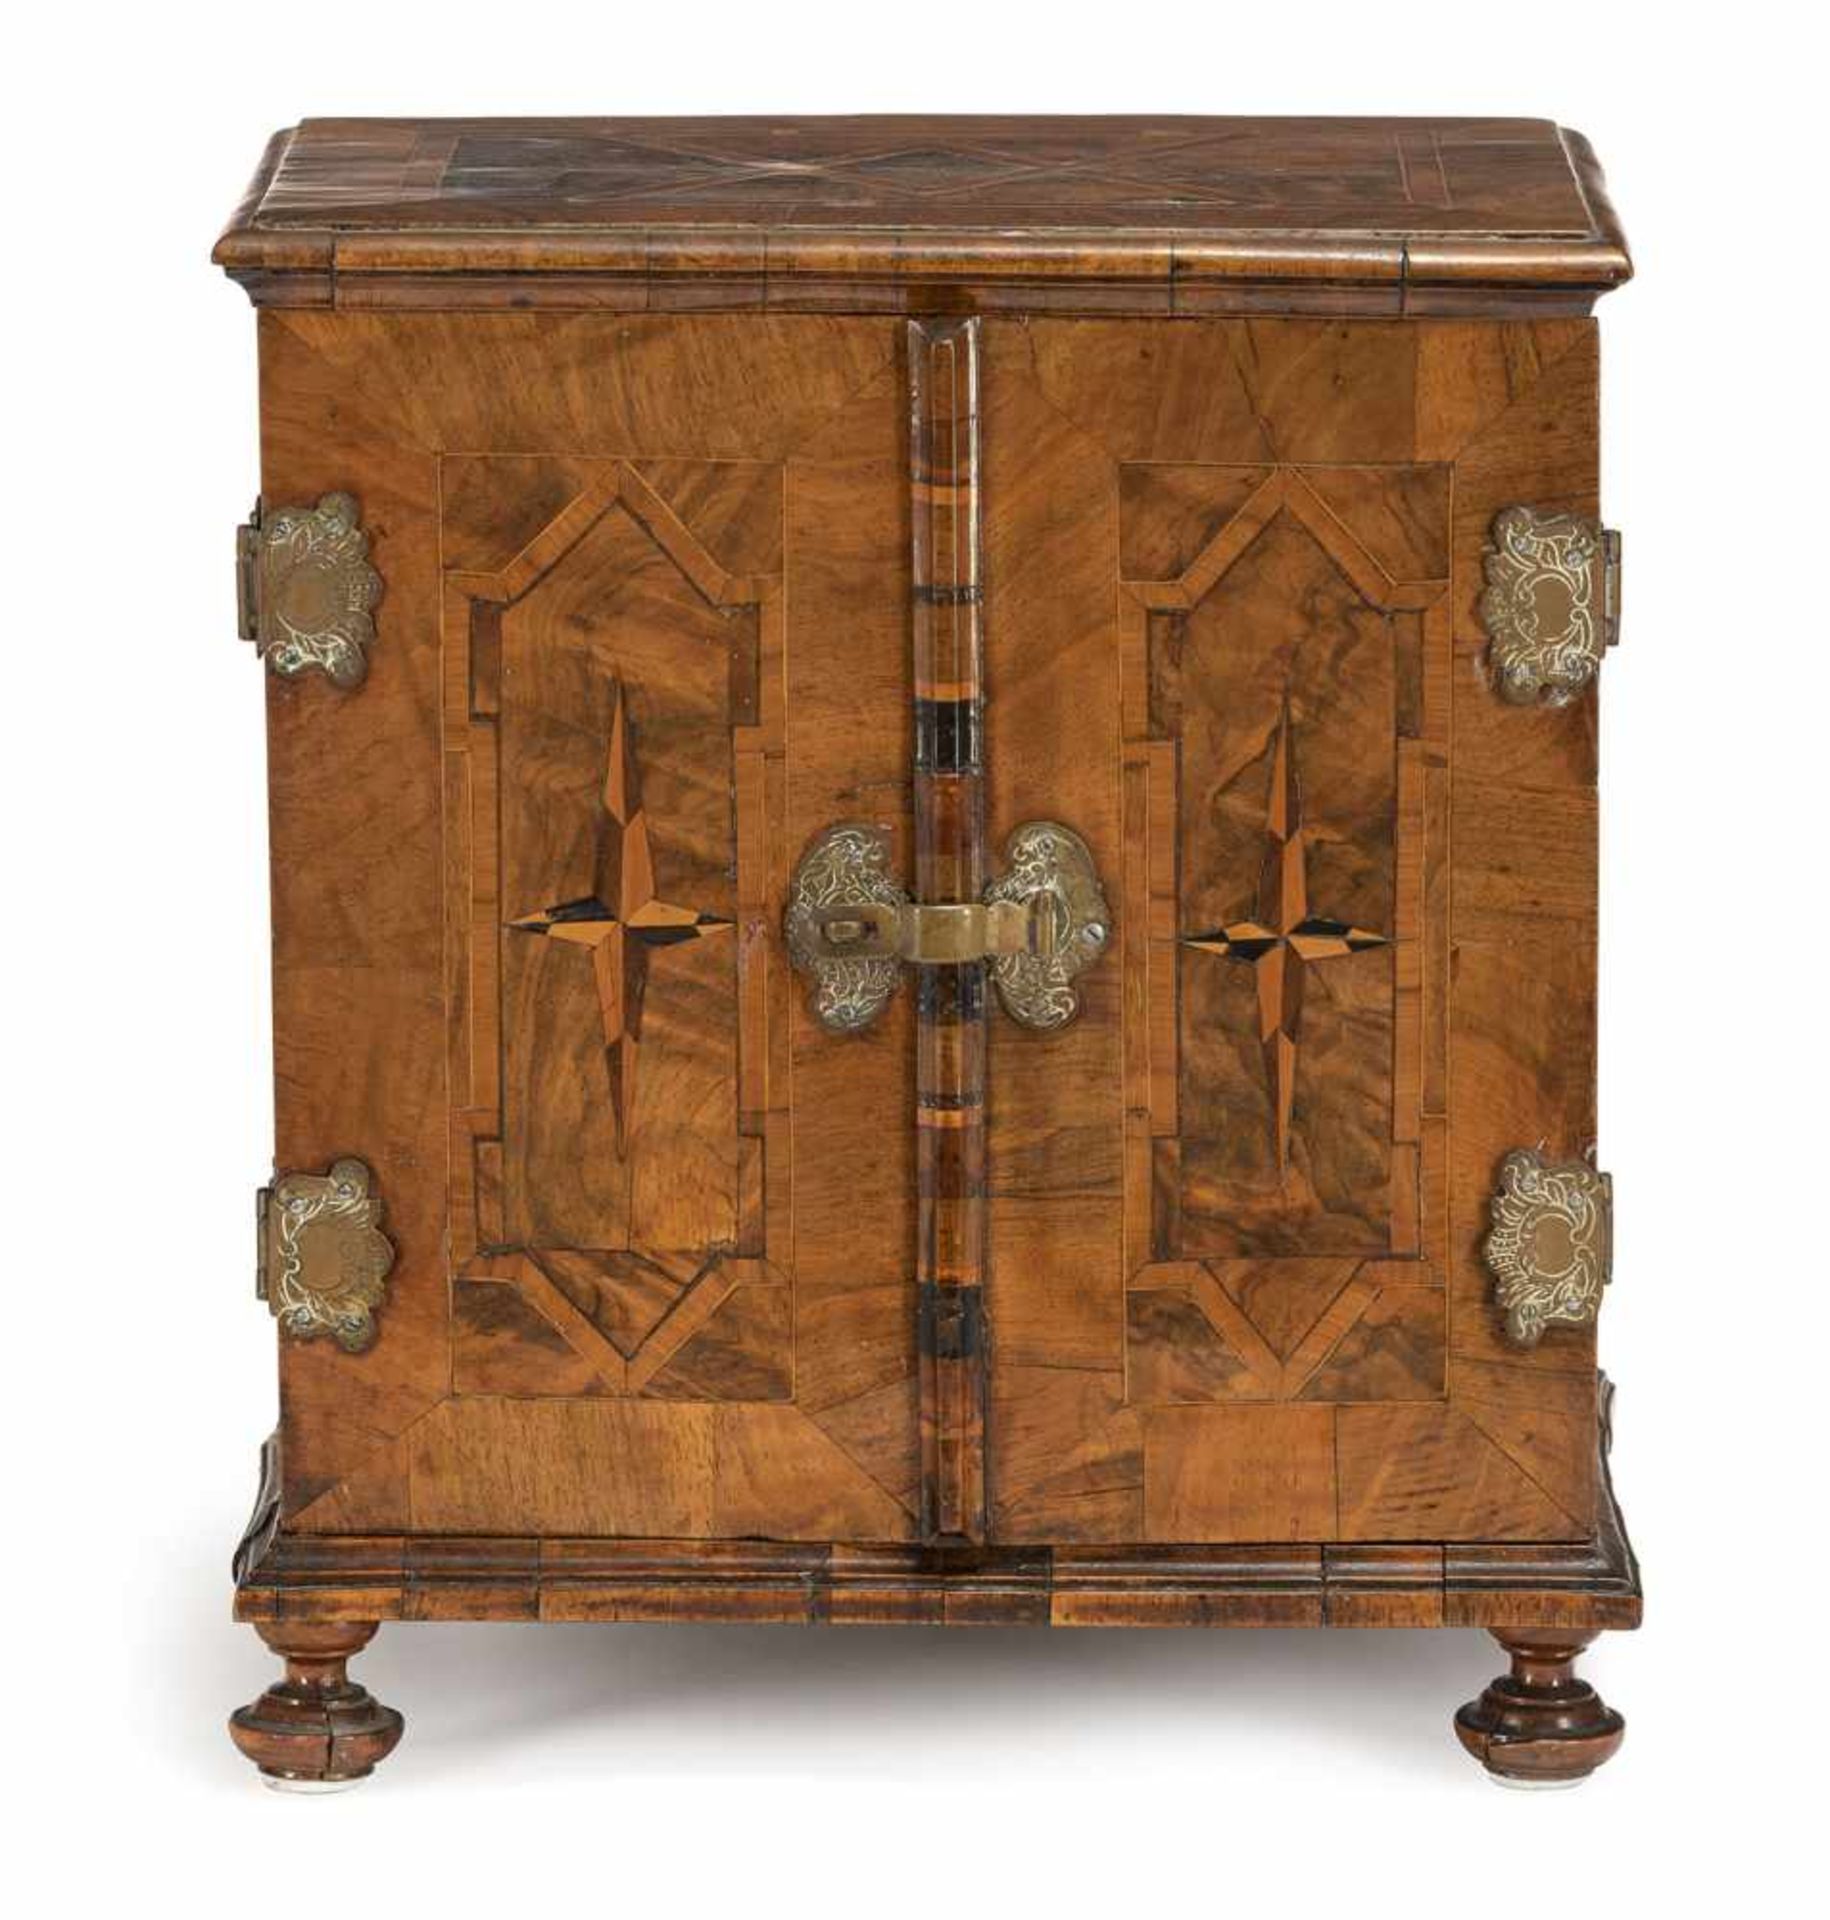 A Baroque brass mounted walnut and plum cabinet, Germany, 18th ct. Rest. Signs of aging.